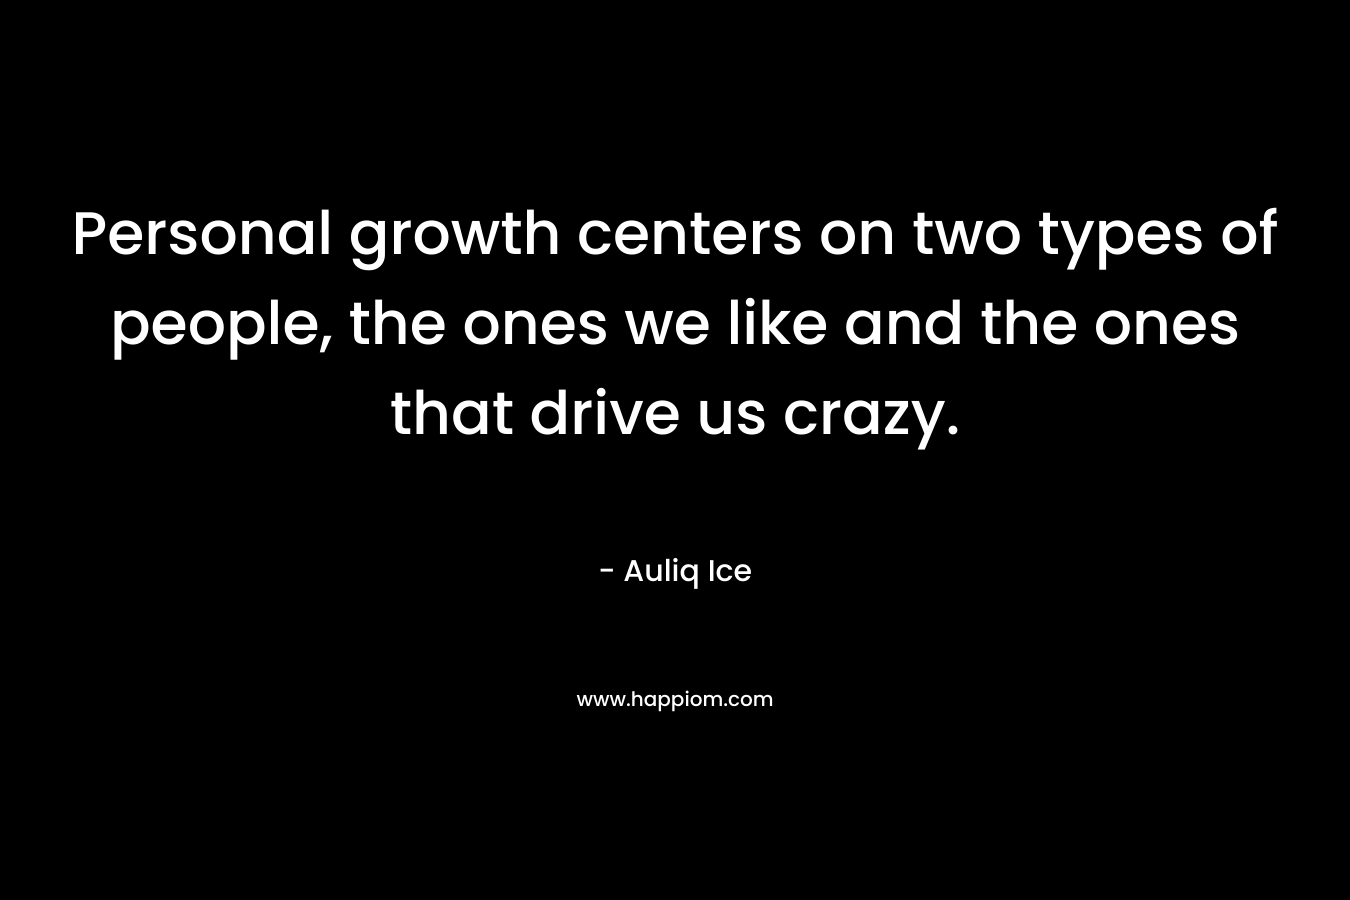 Personal growth centers on two types of people, the ones we like and the ones that drive us crazy.